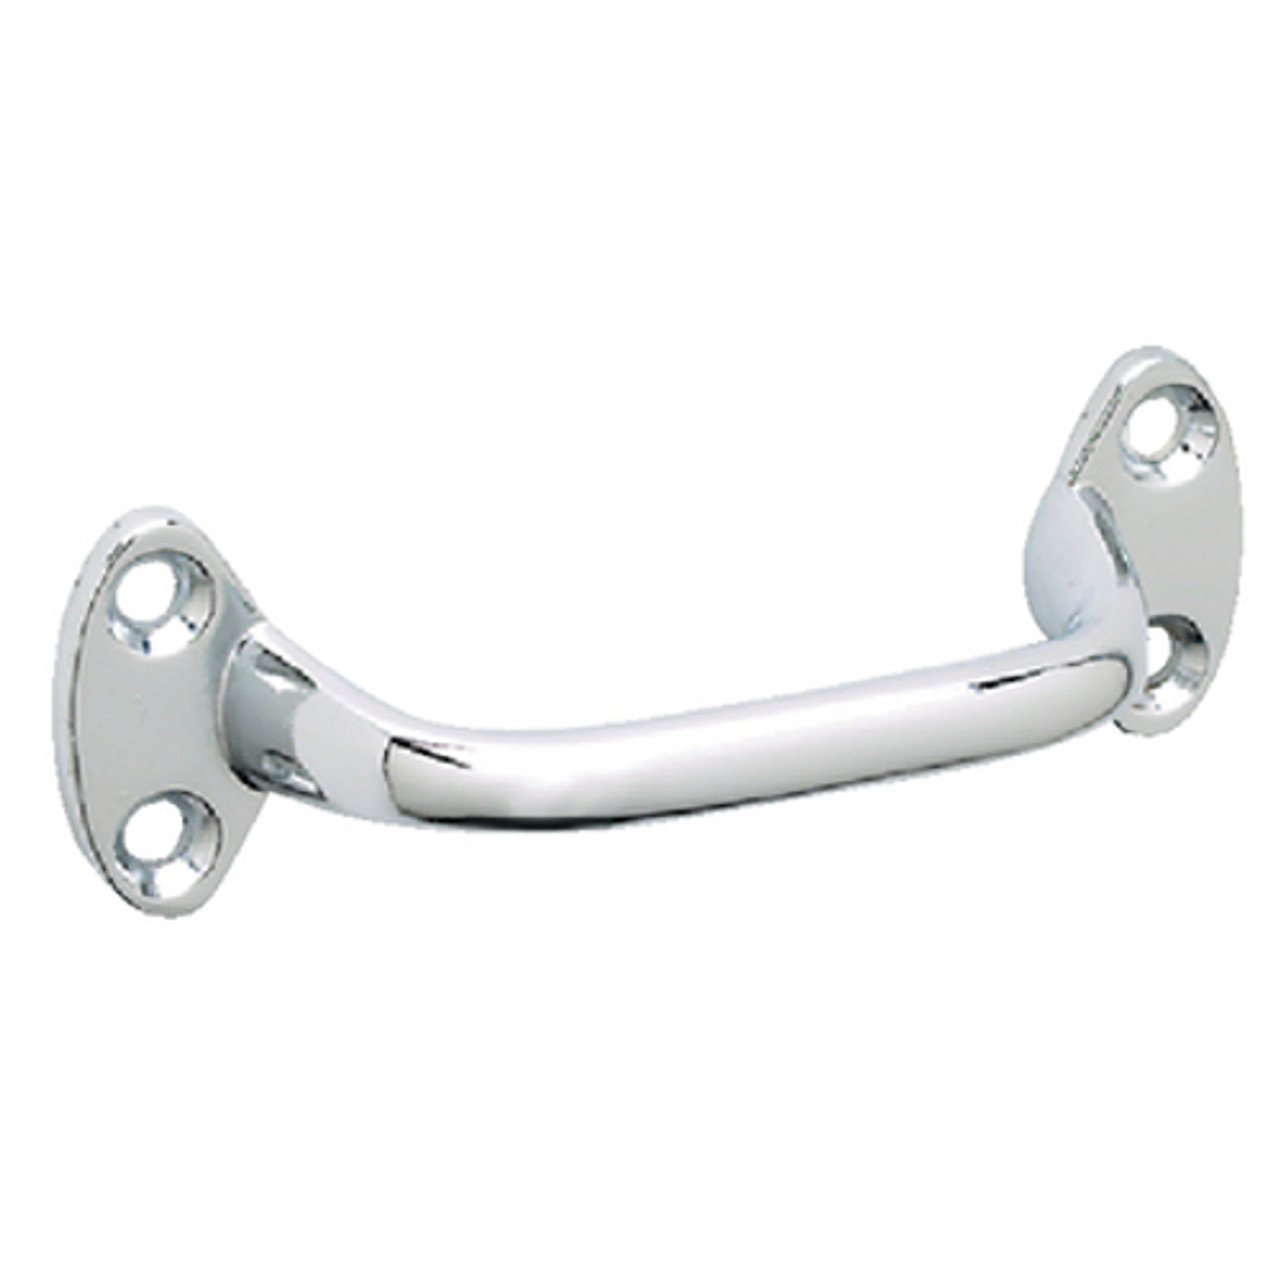 6 Inch Chrome Plated Zinc Grab Handle for Boats, RVs and More